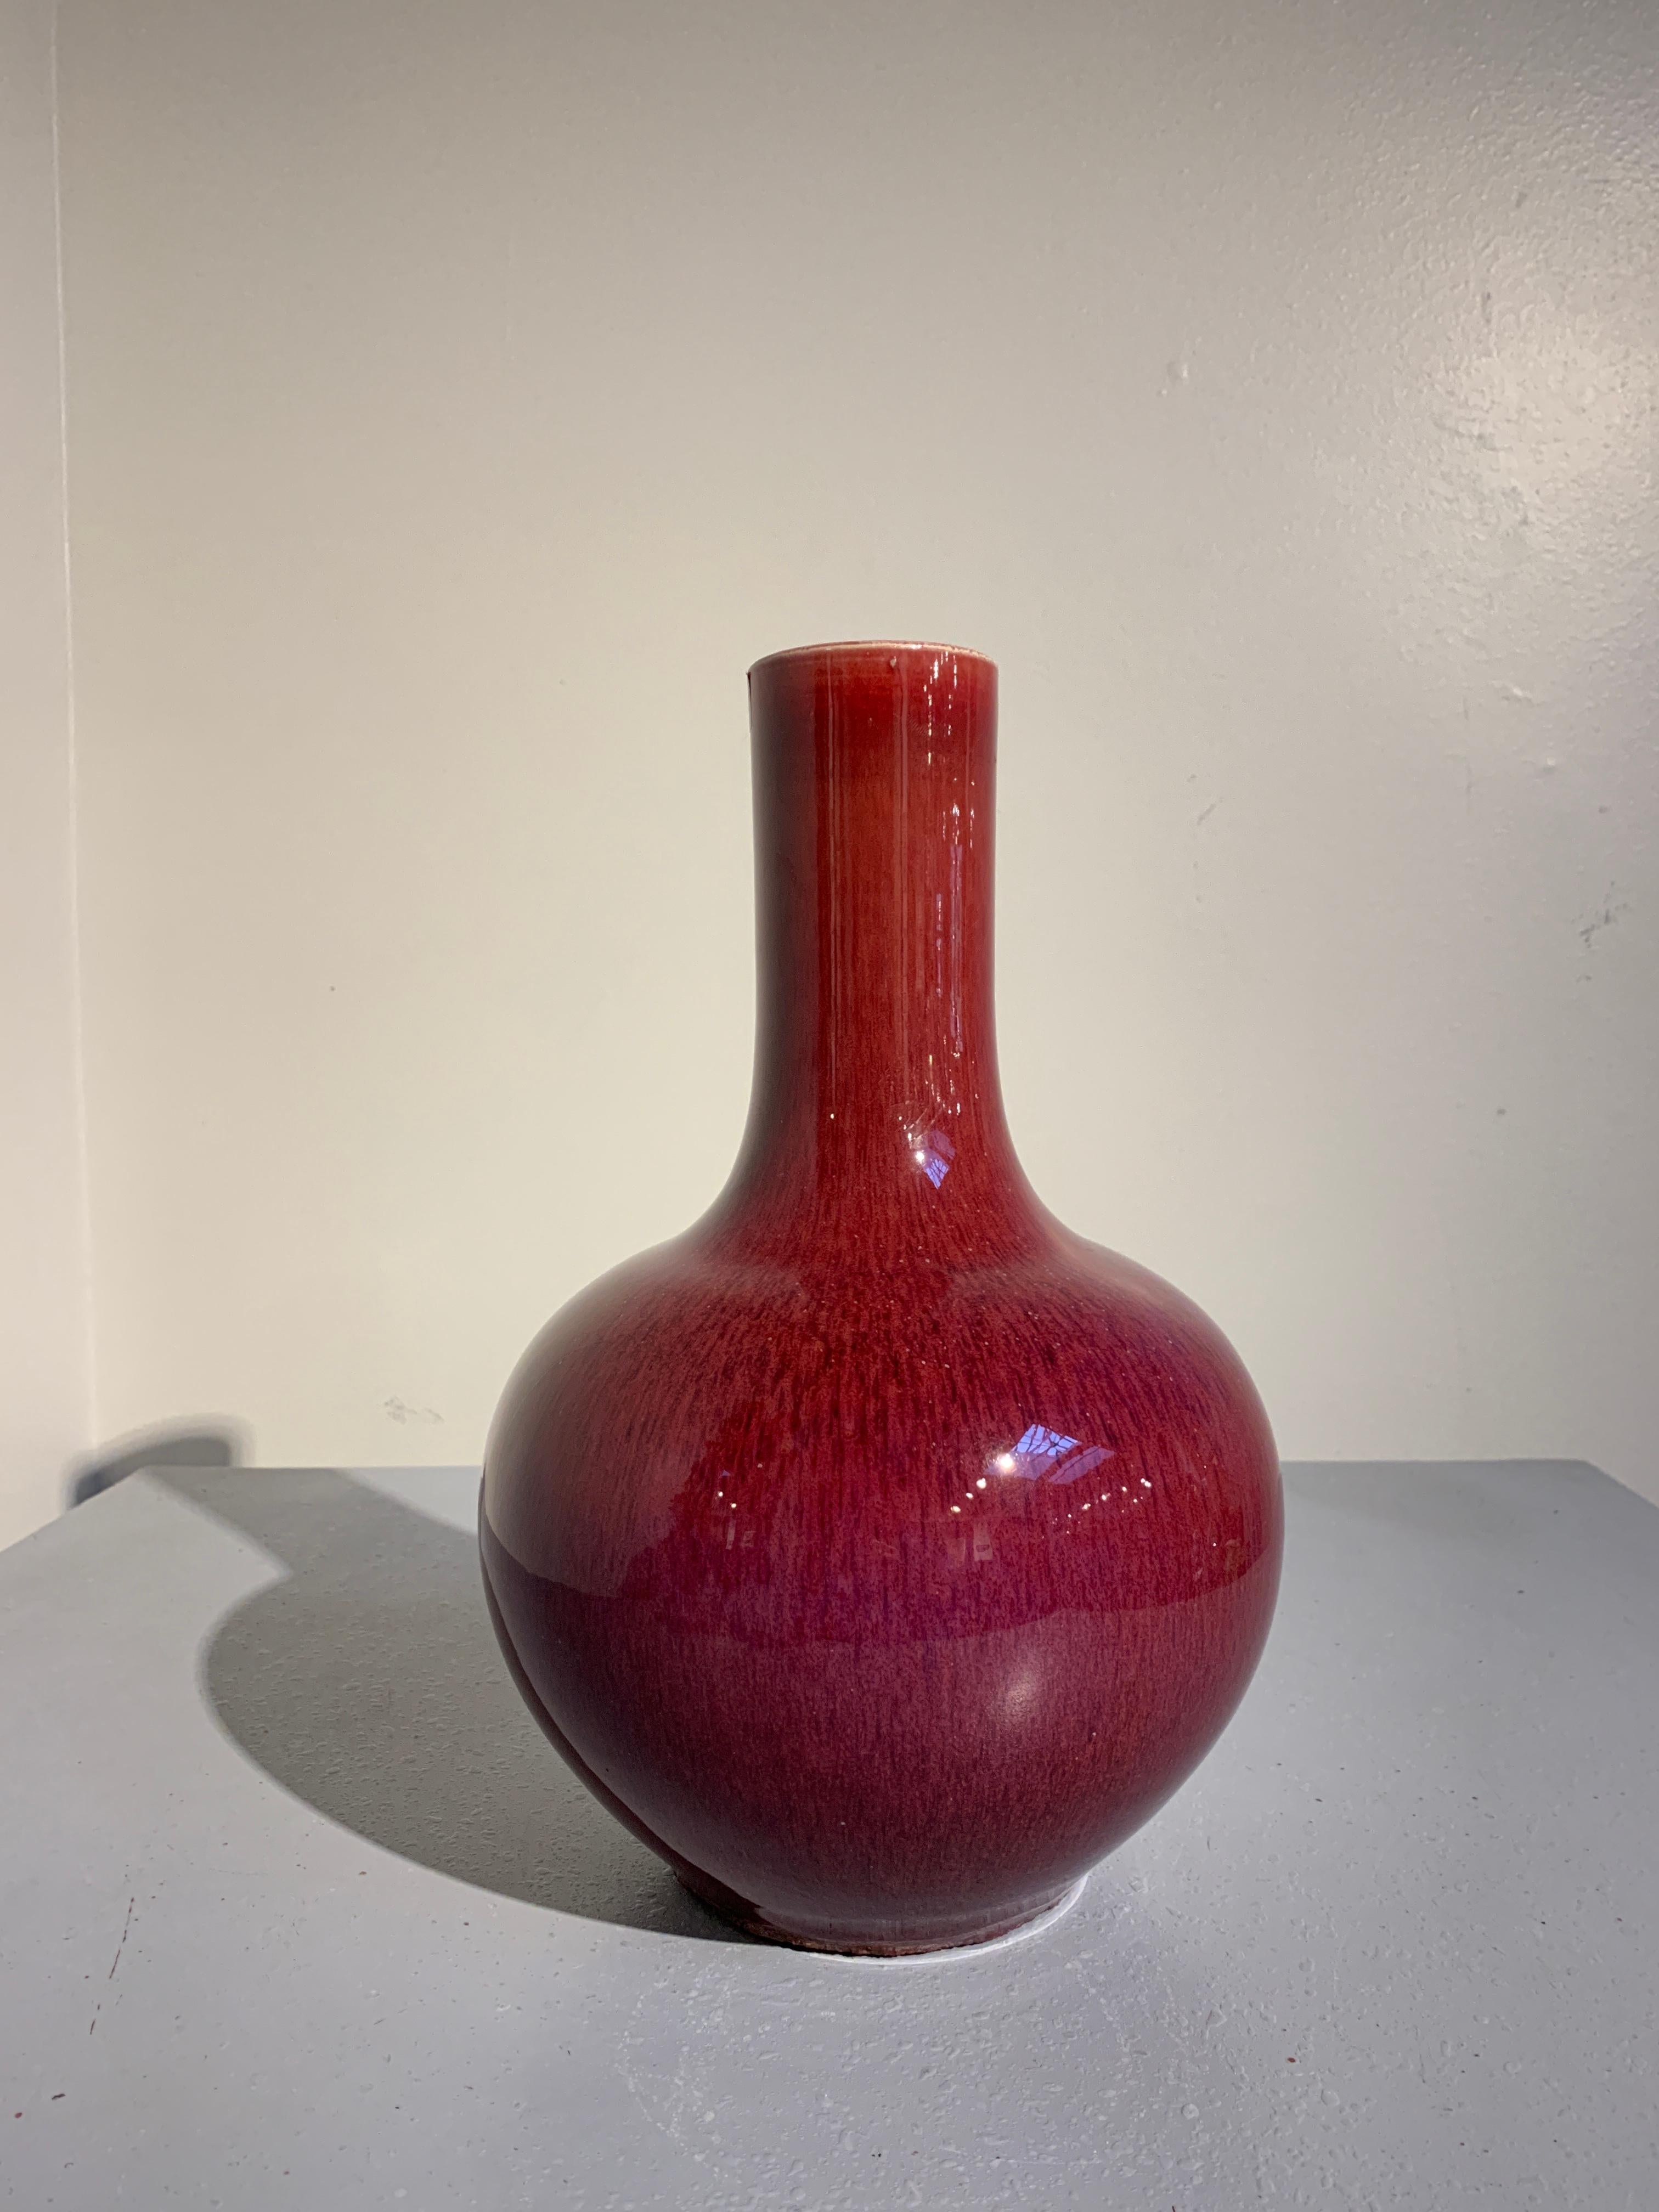 A stunning Chinese late Qing dynasty langyao monochrome red glazed tianquiping bottle vase, 19th century. 

Of bottle form, the vase with a globular body and tall, wide neck, all sitting upon a short recessed foot and covered in a fascinating